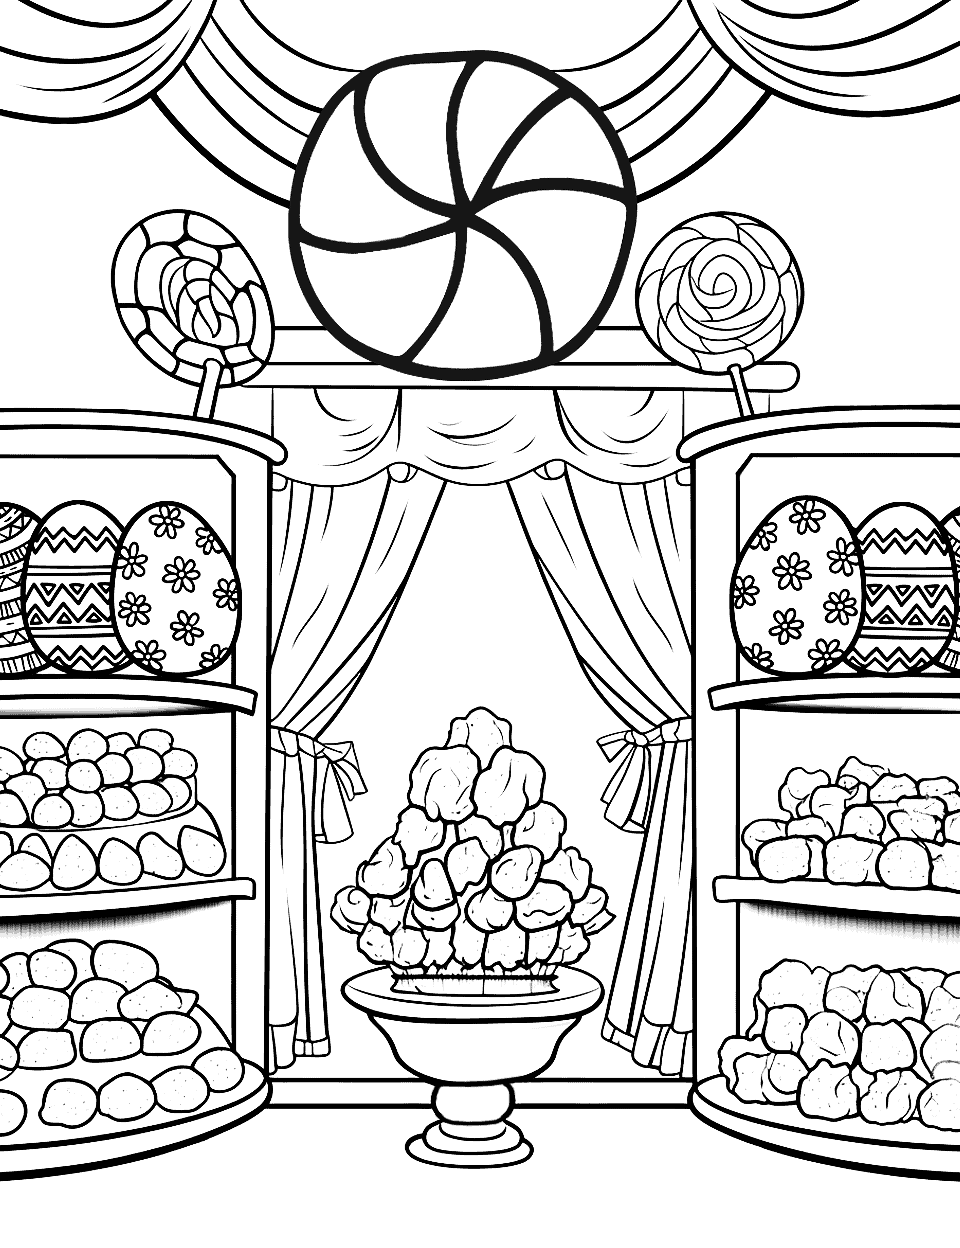 Large Candy Store Coloring Page - An interior view of a large candy store with shelves full of different types of candies.